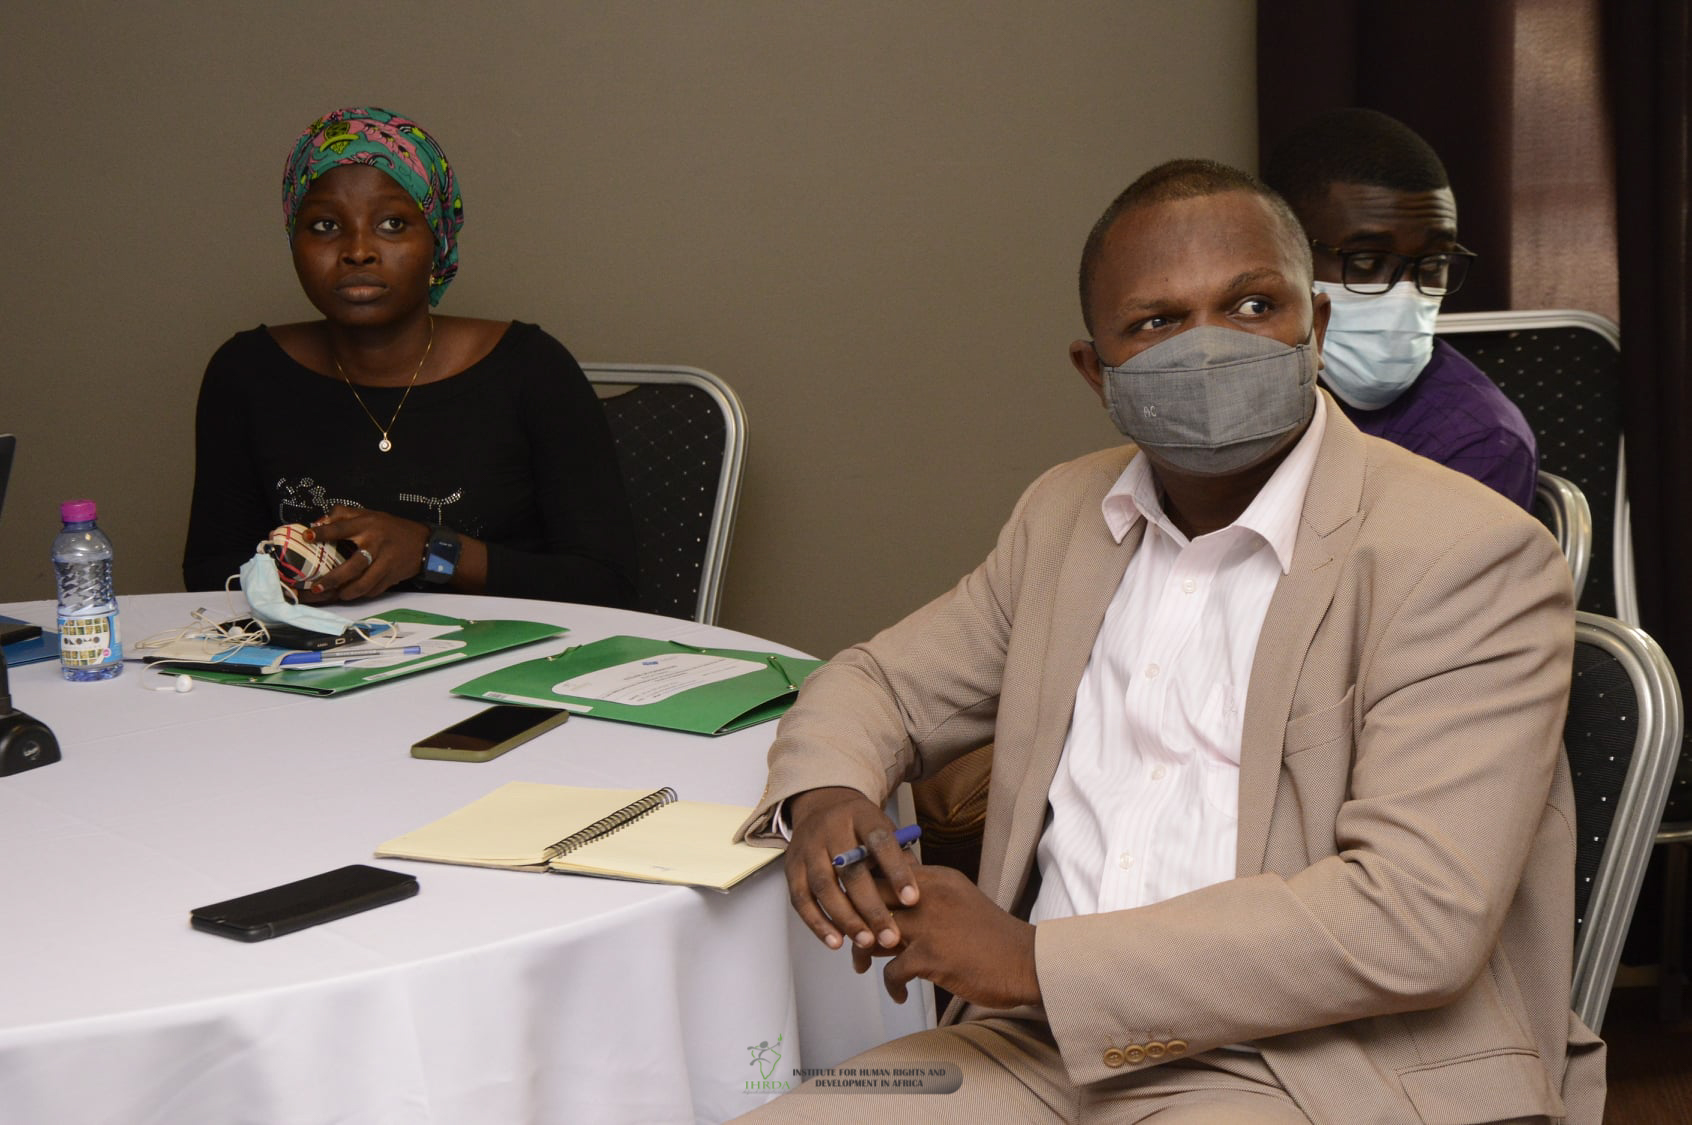 IHRDA and Centre de documentation et de formation sur les droits de l’homme (CDFDH) are organising a human rights strategic litigation training and case-identification workshop with about 25 lawyers and CSOs in Lome, Togo, 26-28 Jan 2021. Activity funded by NED.